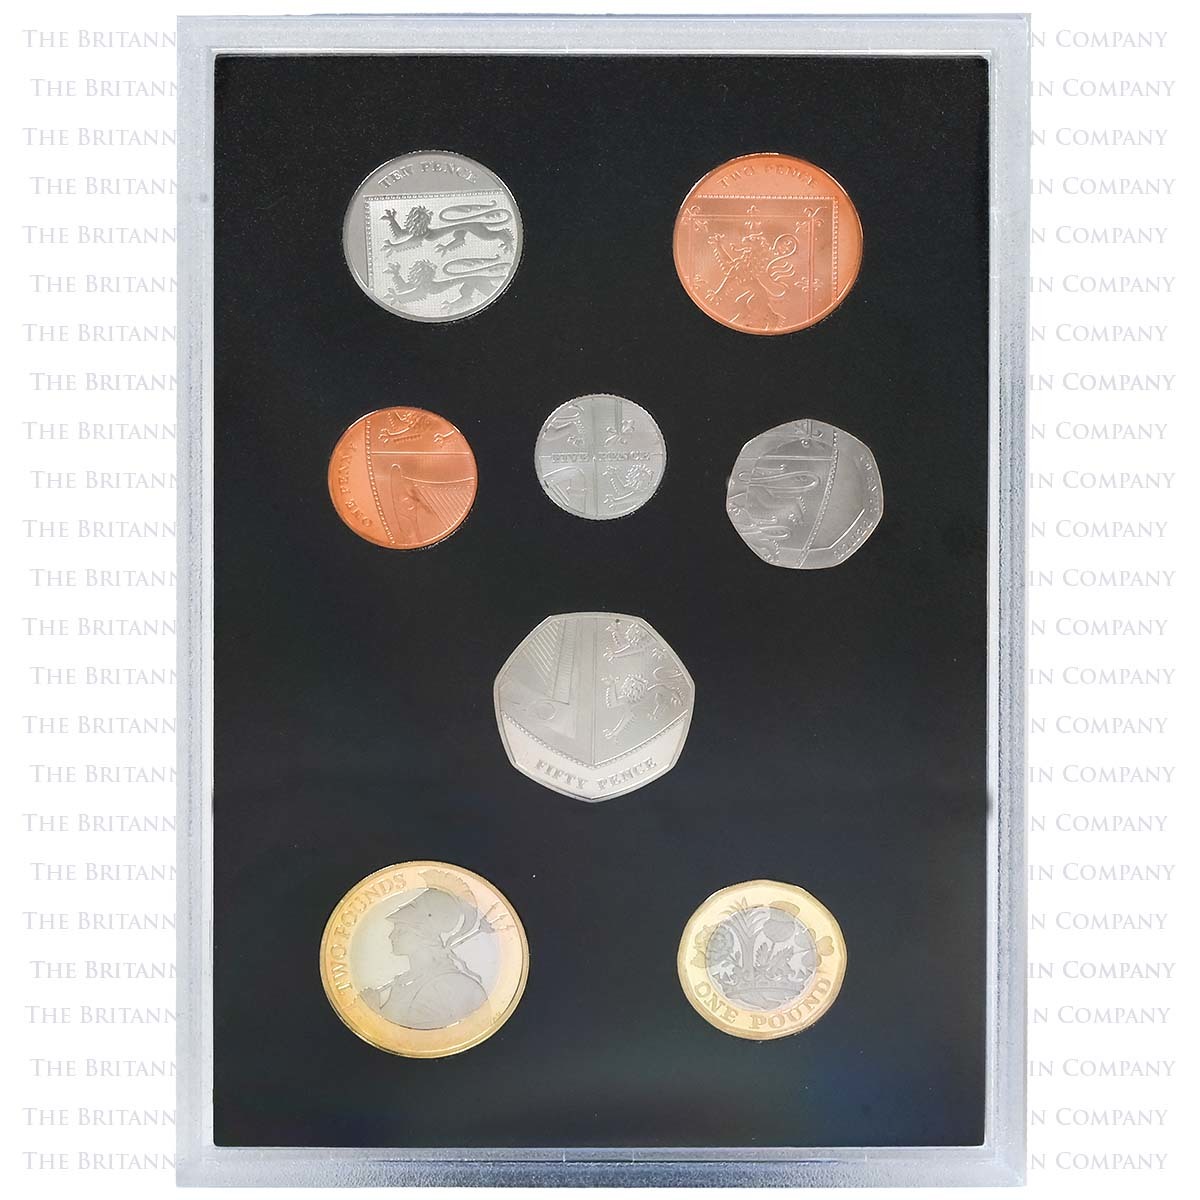 2017-proof-coin-set-collector-edtition-004-m